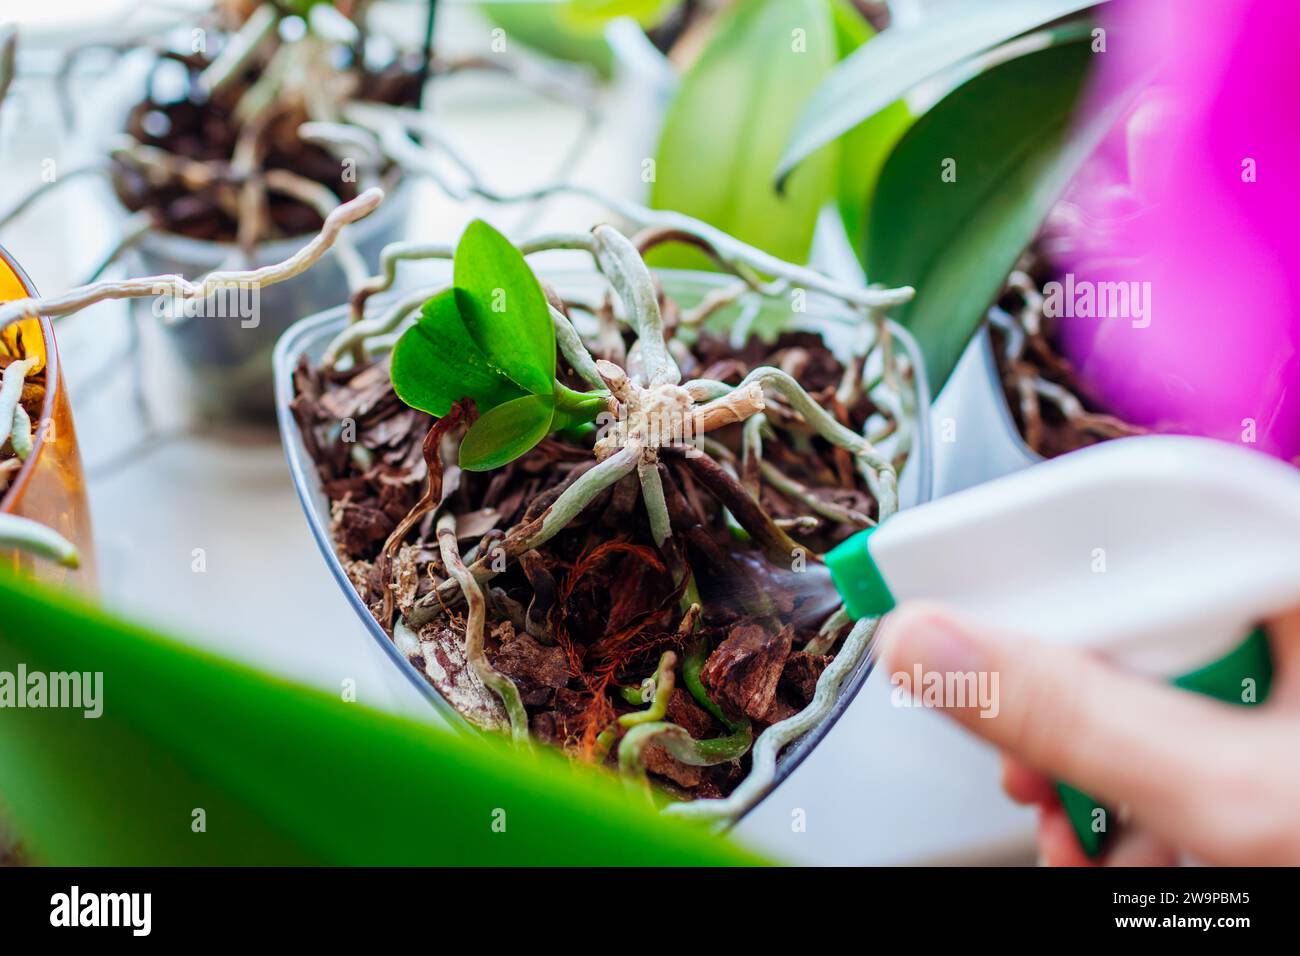 Spraying baby orchid growing on mother plant stem with water. Propagating potted phalaenopsis orchid plants at home. Reproduction breeding cultivating Stock Photo